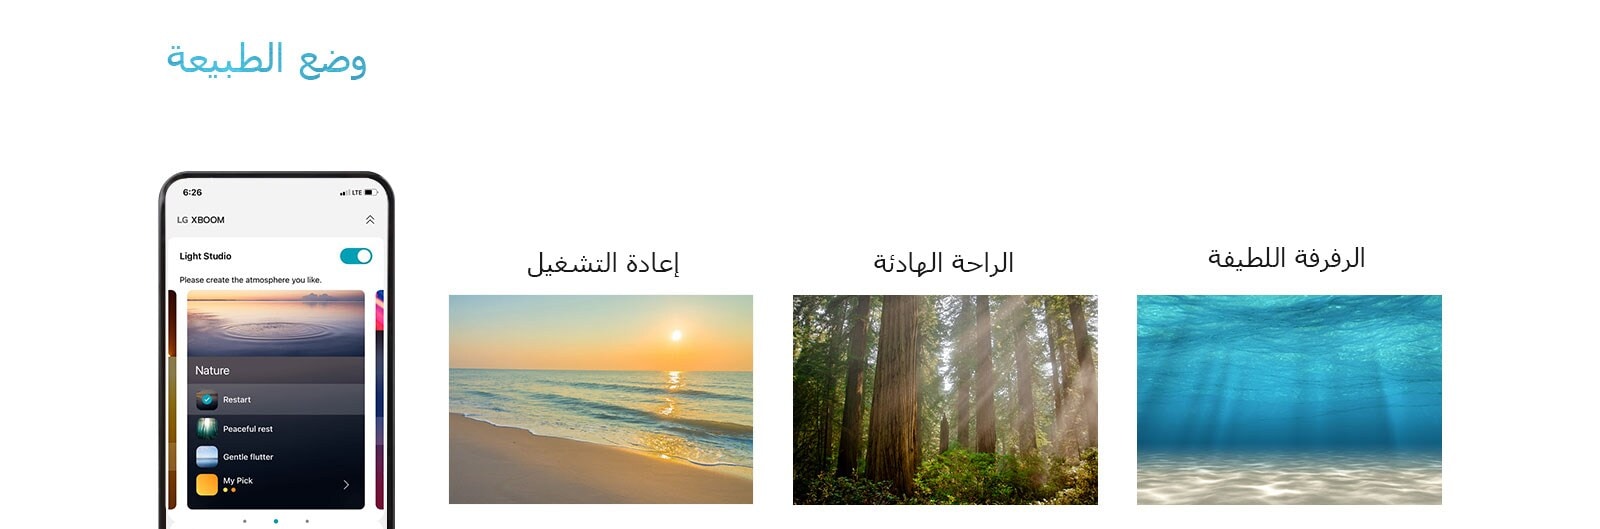 Mobile phone image with the APP screen on in nature mode. An image of a beach setting in the sunset. An image of a sunlit forest. The image of light shining under the clear sea.